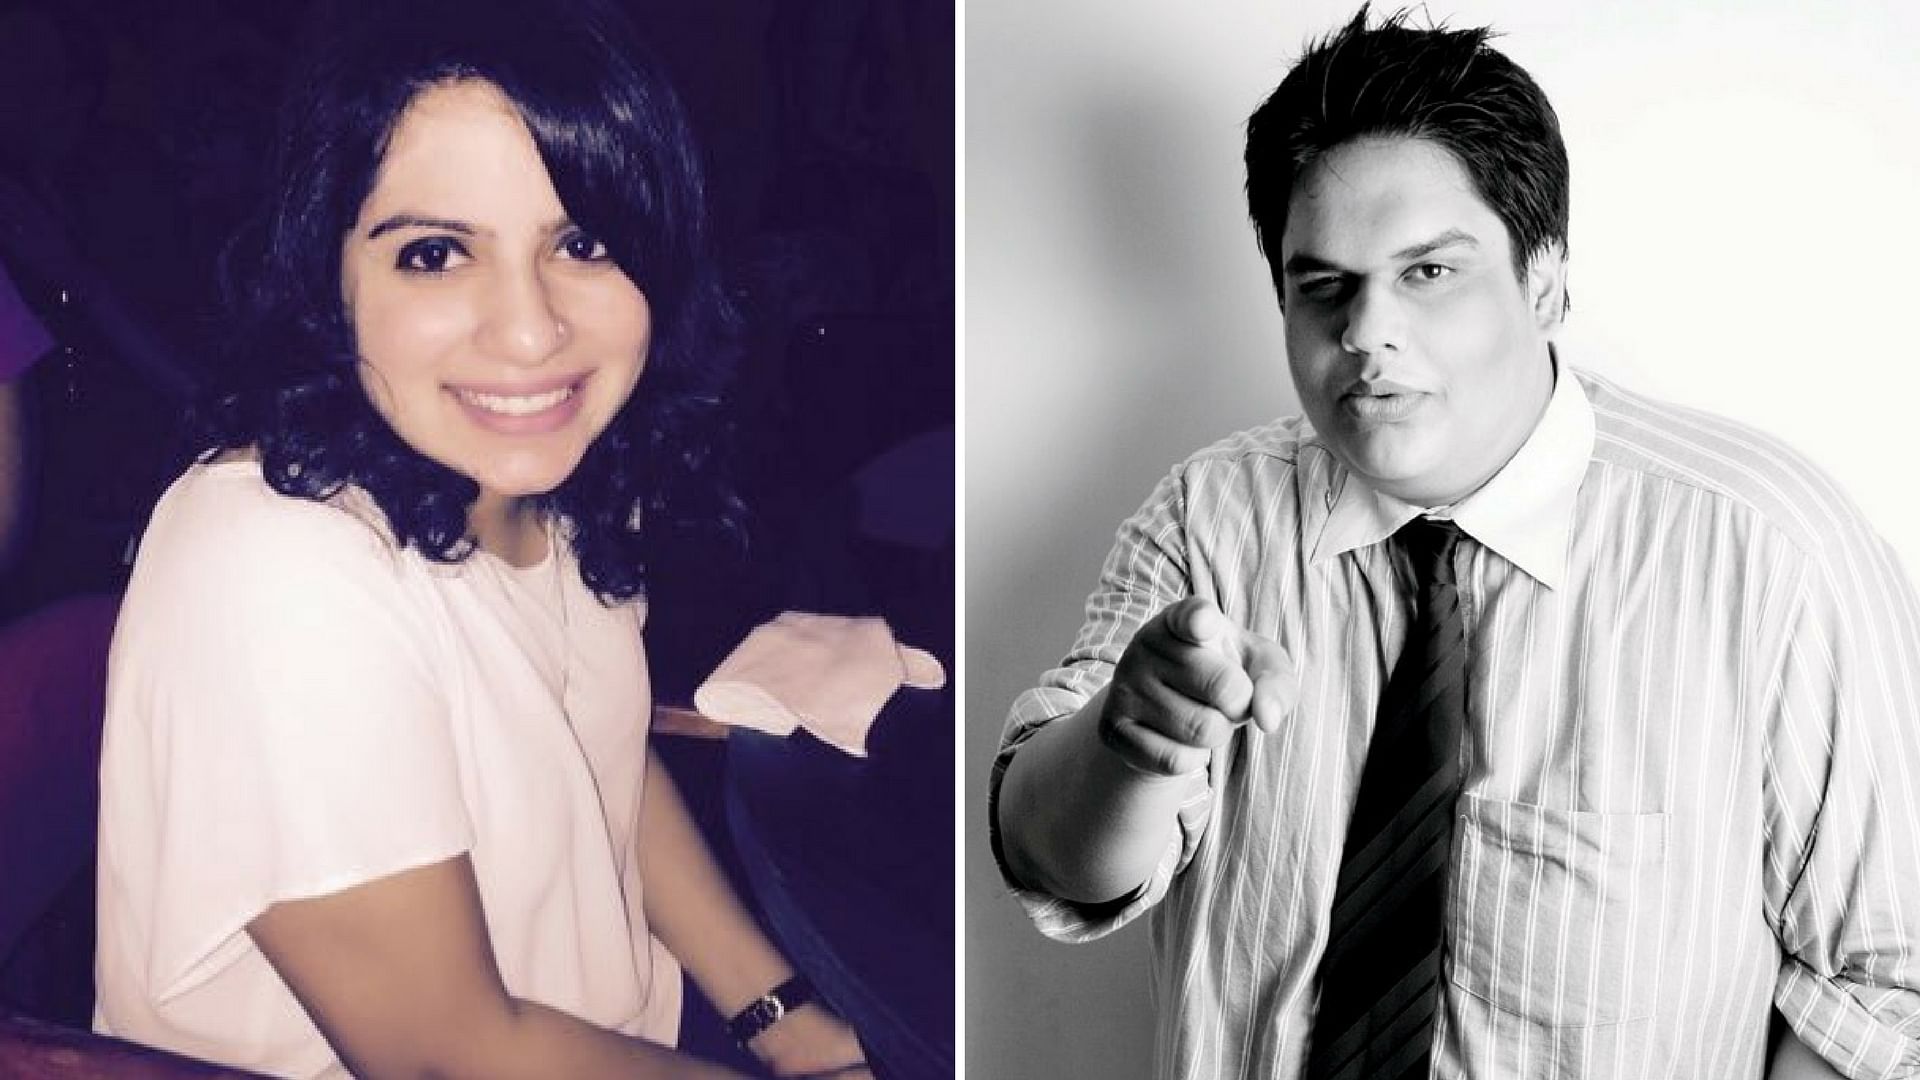 

Mallika Dua and Tanmay Bhat have an important message on mental health. (Photo courtesy: Twitter/altered by <b>The Quint</b>)